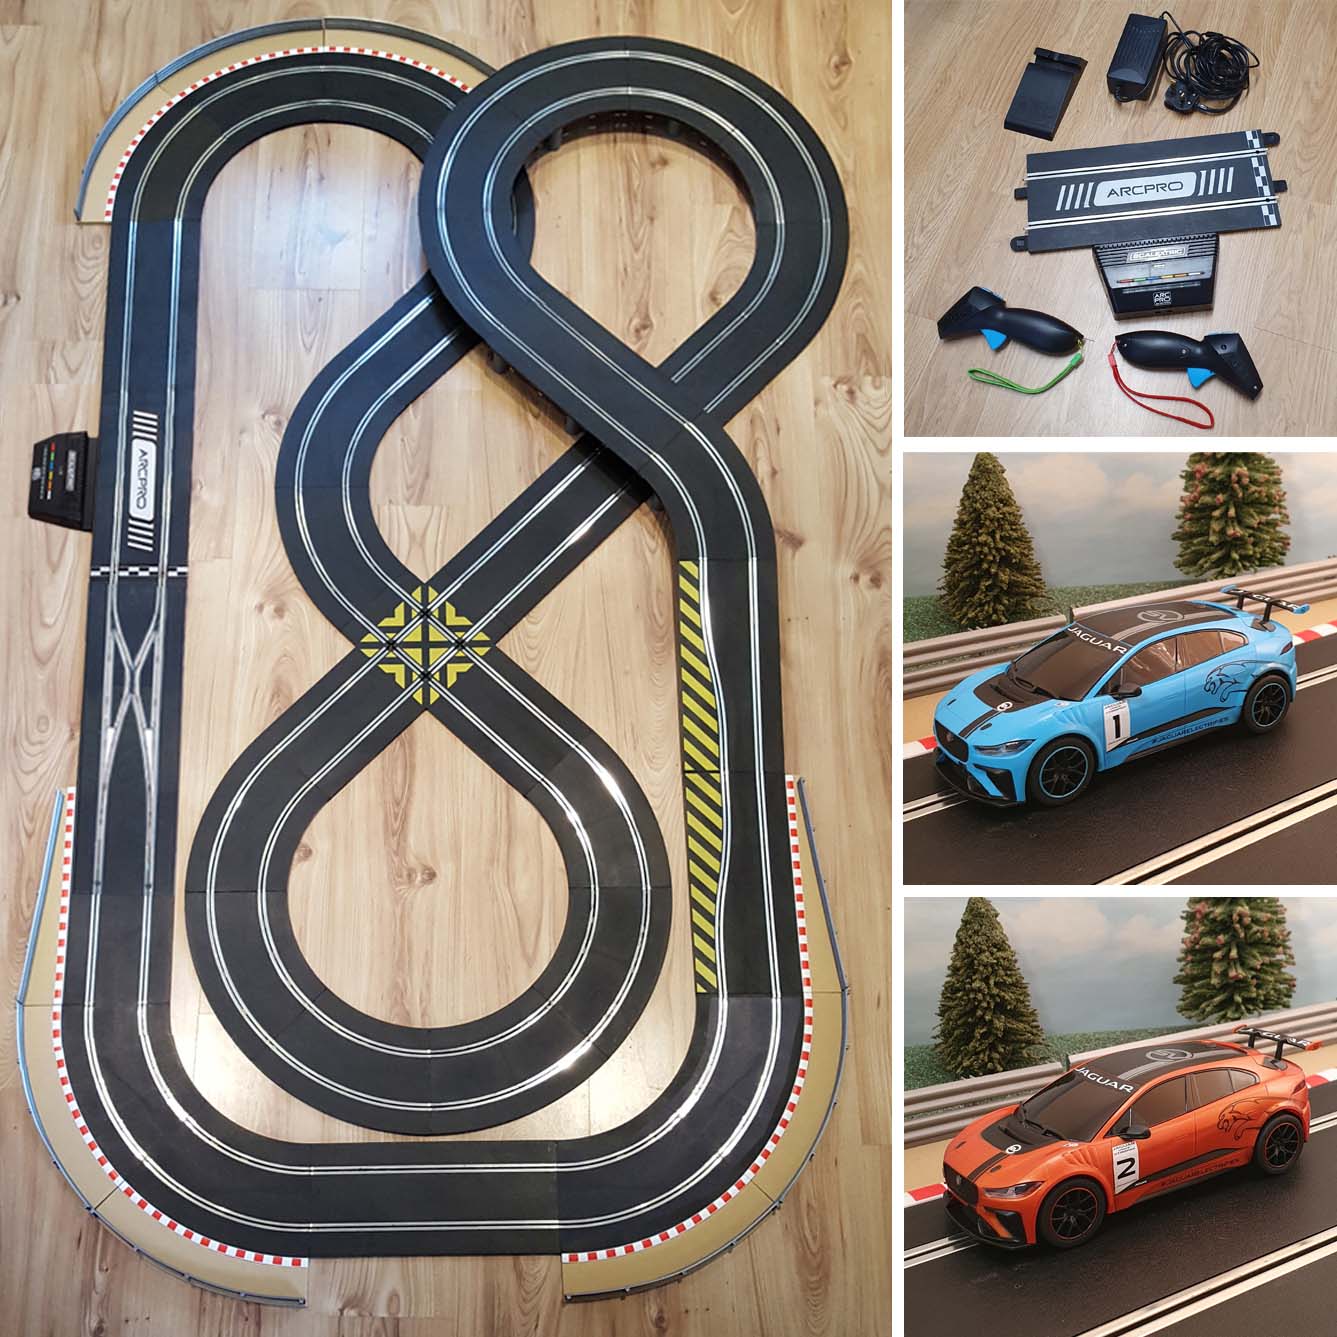 Scalextric 1:32 Figure-Of-Eight Layout Set ARC Pro With Jaguar I-Pace Cars